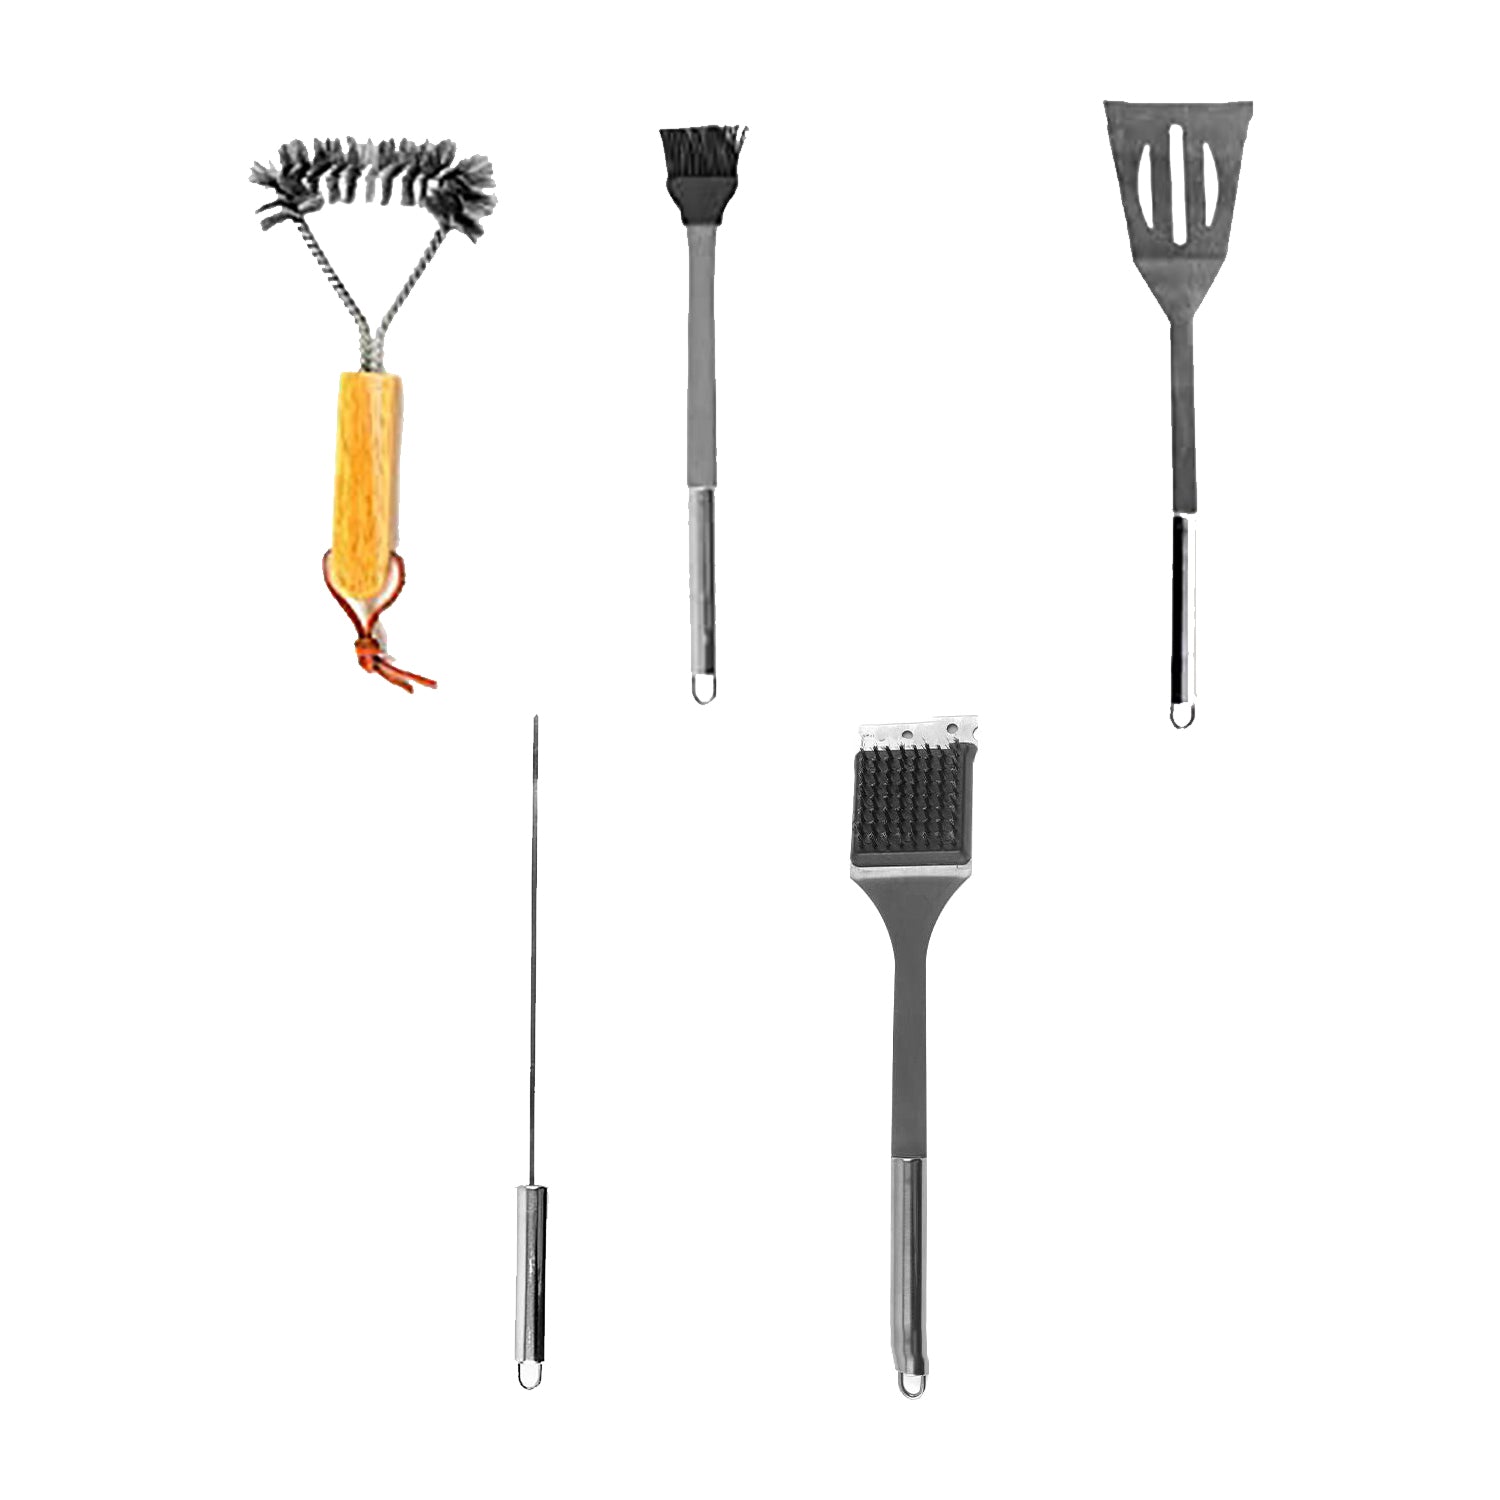 Barbeque Grill Cooking & Cleaning Kit, Set of 5 | Barbeque Accessories